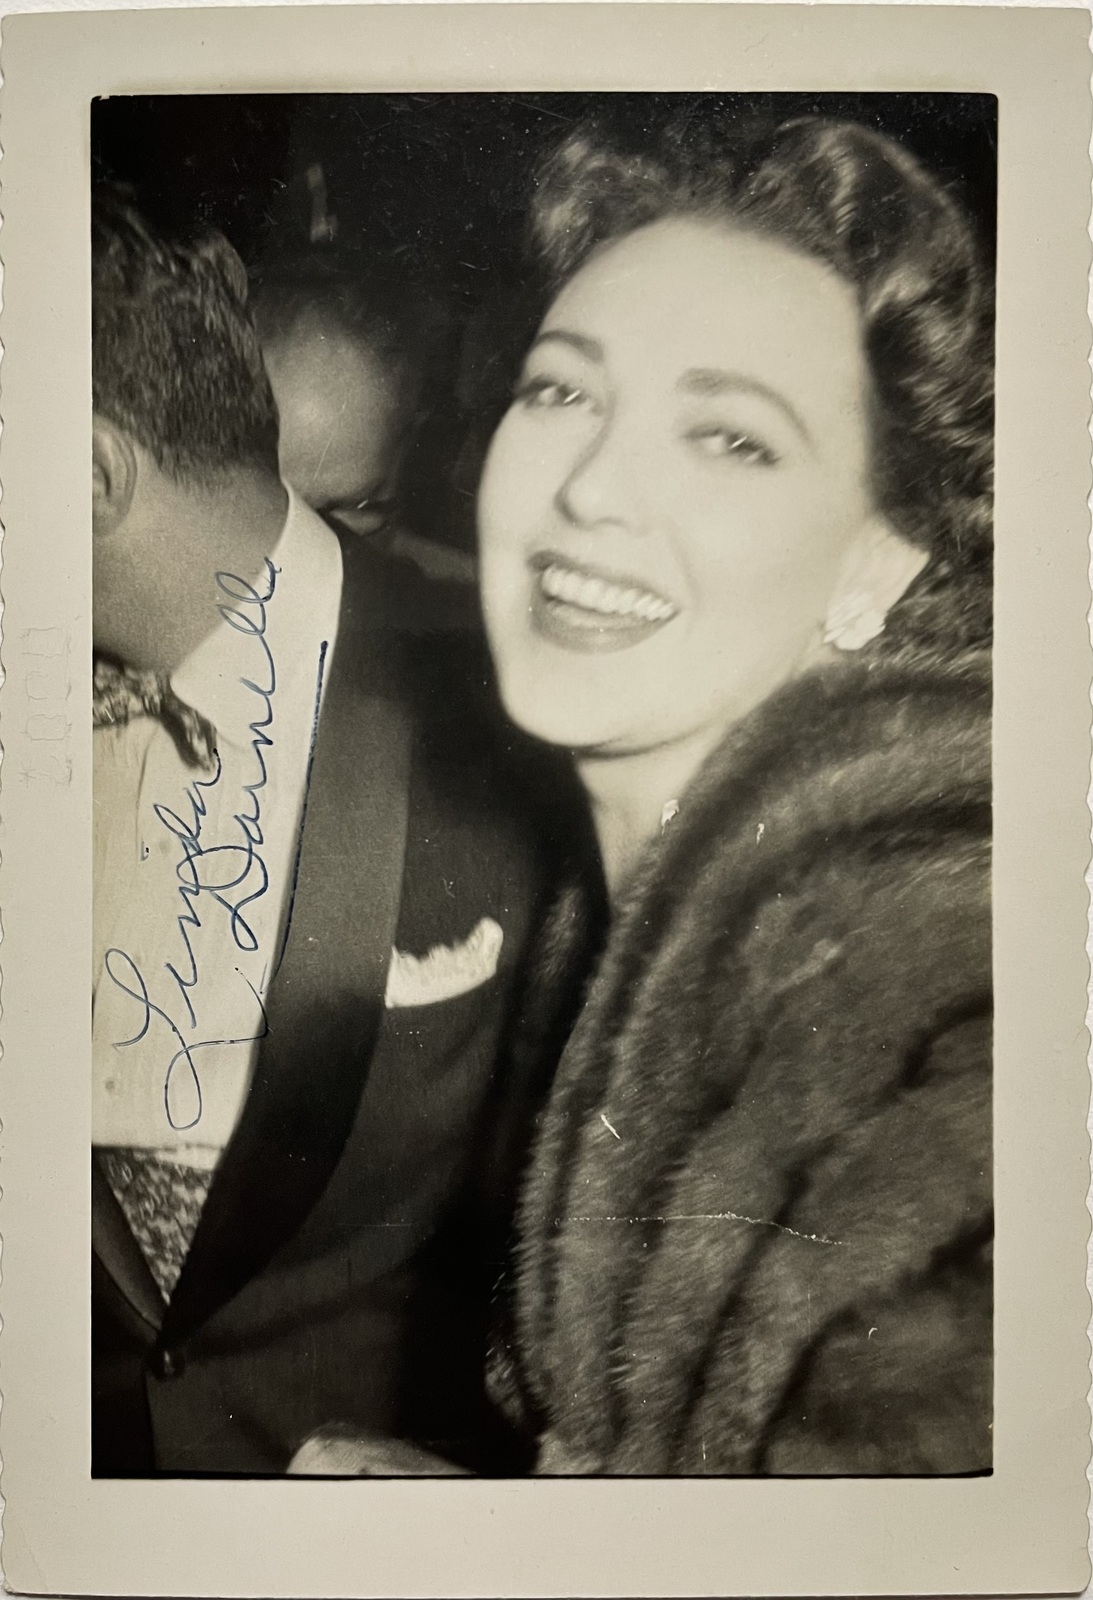 LINDA DARNELL Signed Autographed 4" x 5" Original PHOTO Blood and Sand 1940s - $199.99